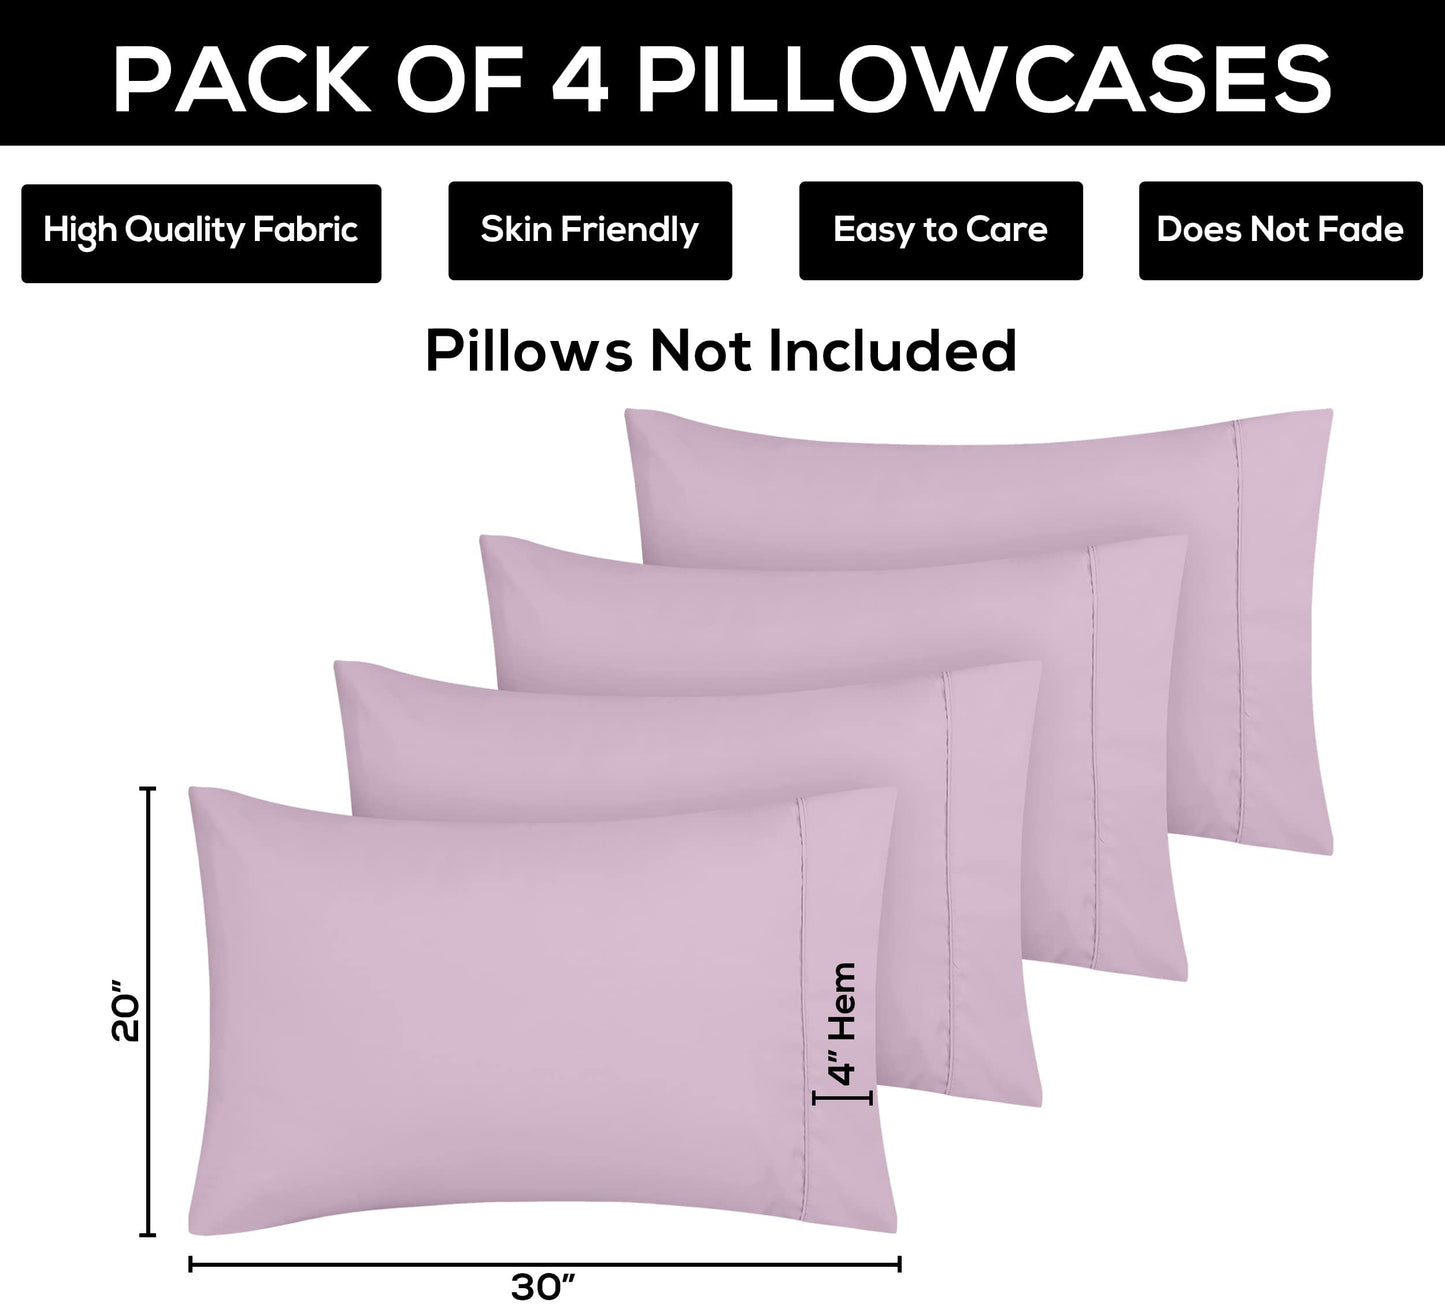 Utopia Bedding Queen Pillow Cases - 4 Pack - Envelope Closure - Soft Brushed Microfiber Fabric - Shrinkage and Fade Resistant Pillow Cases Queen Size 20 X 30 Inches (Queen, Lavender)